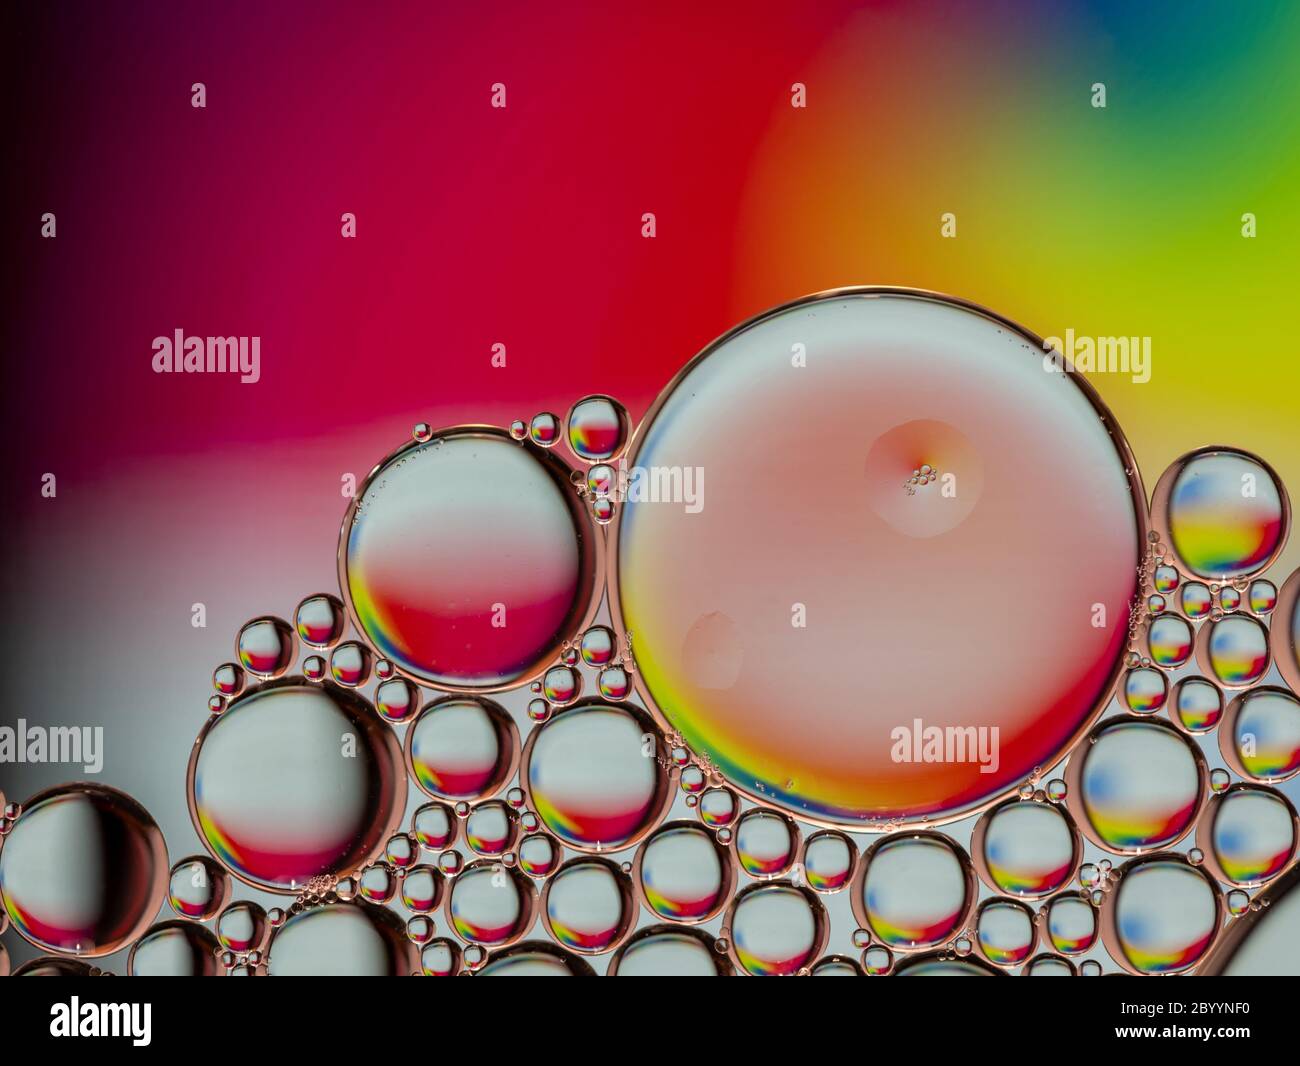 Colorful oil bubbles rimmed in a copper color forming a textured abstract background Stock Photo